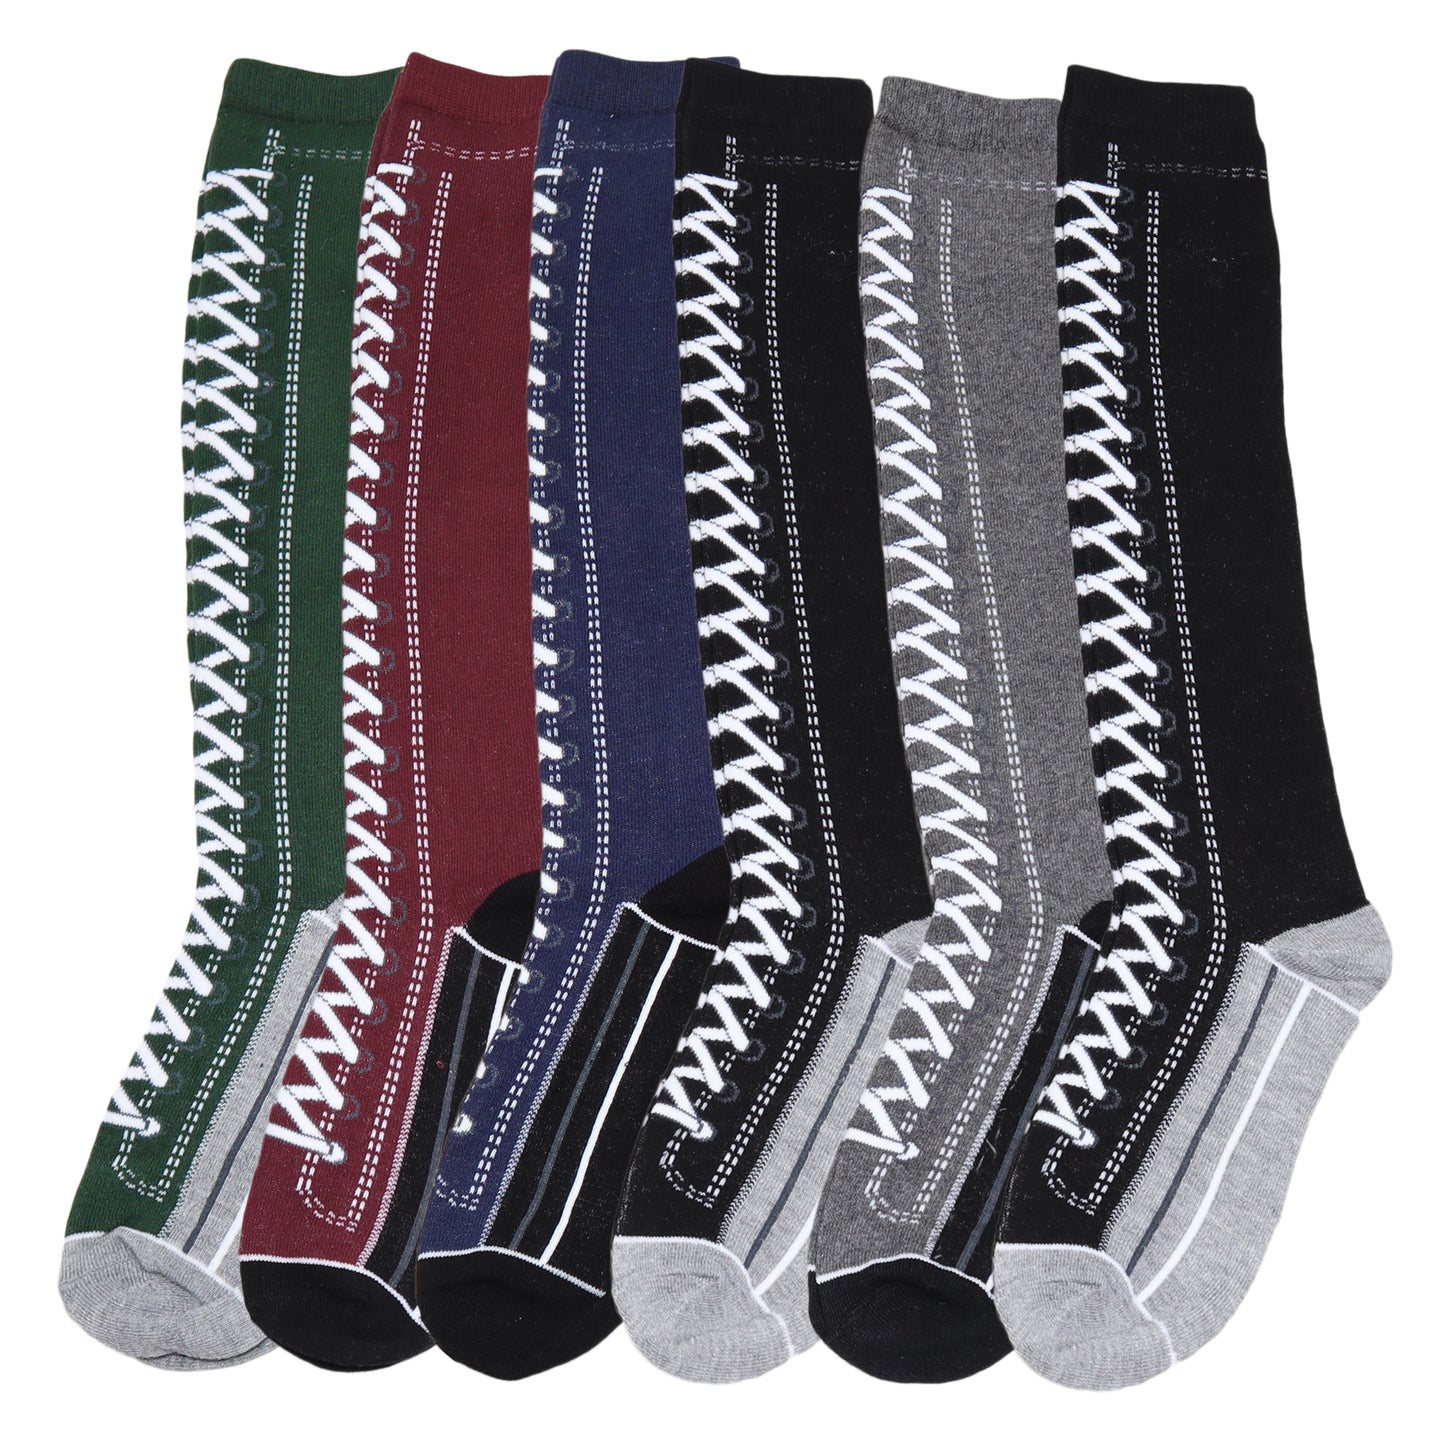 Cotton Knee-High Socks with Lace Up Boots Design (6-Pack)